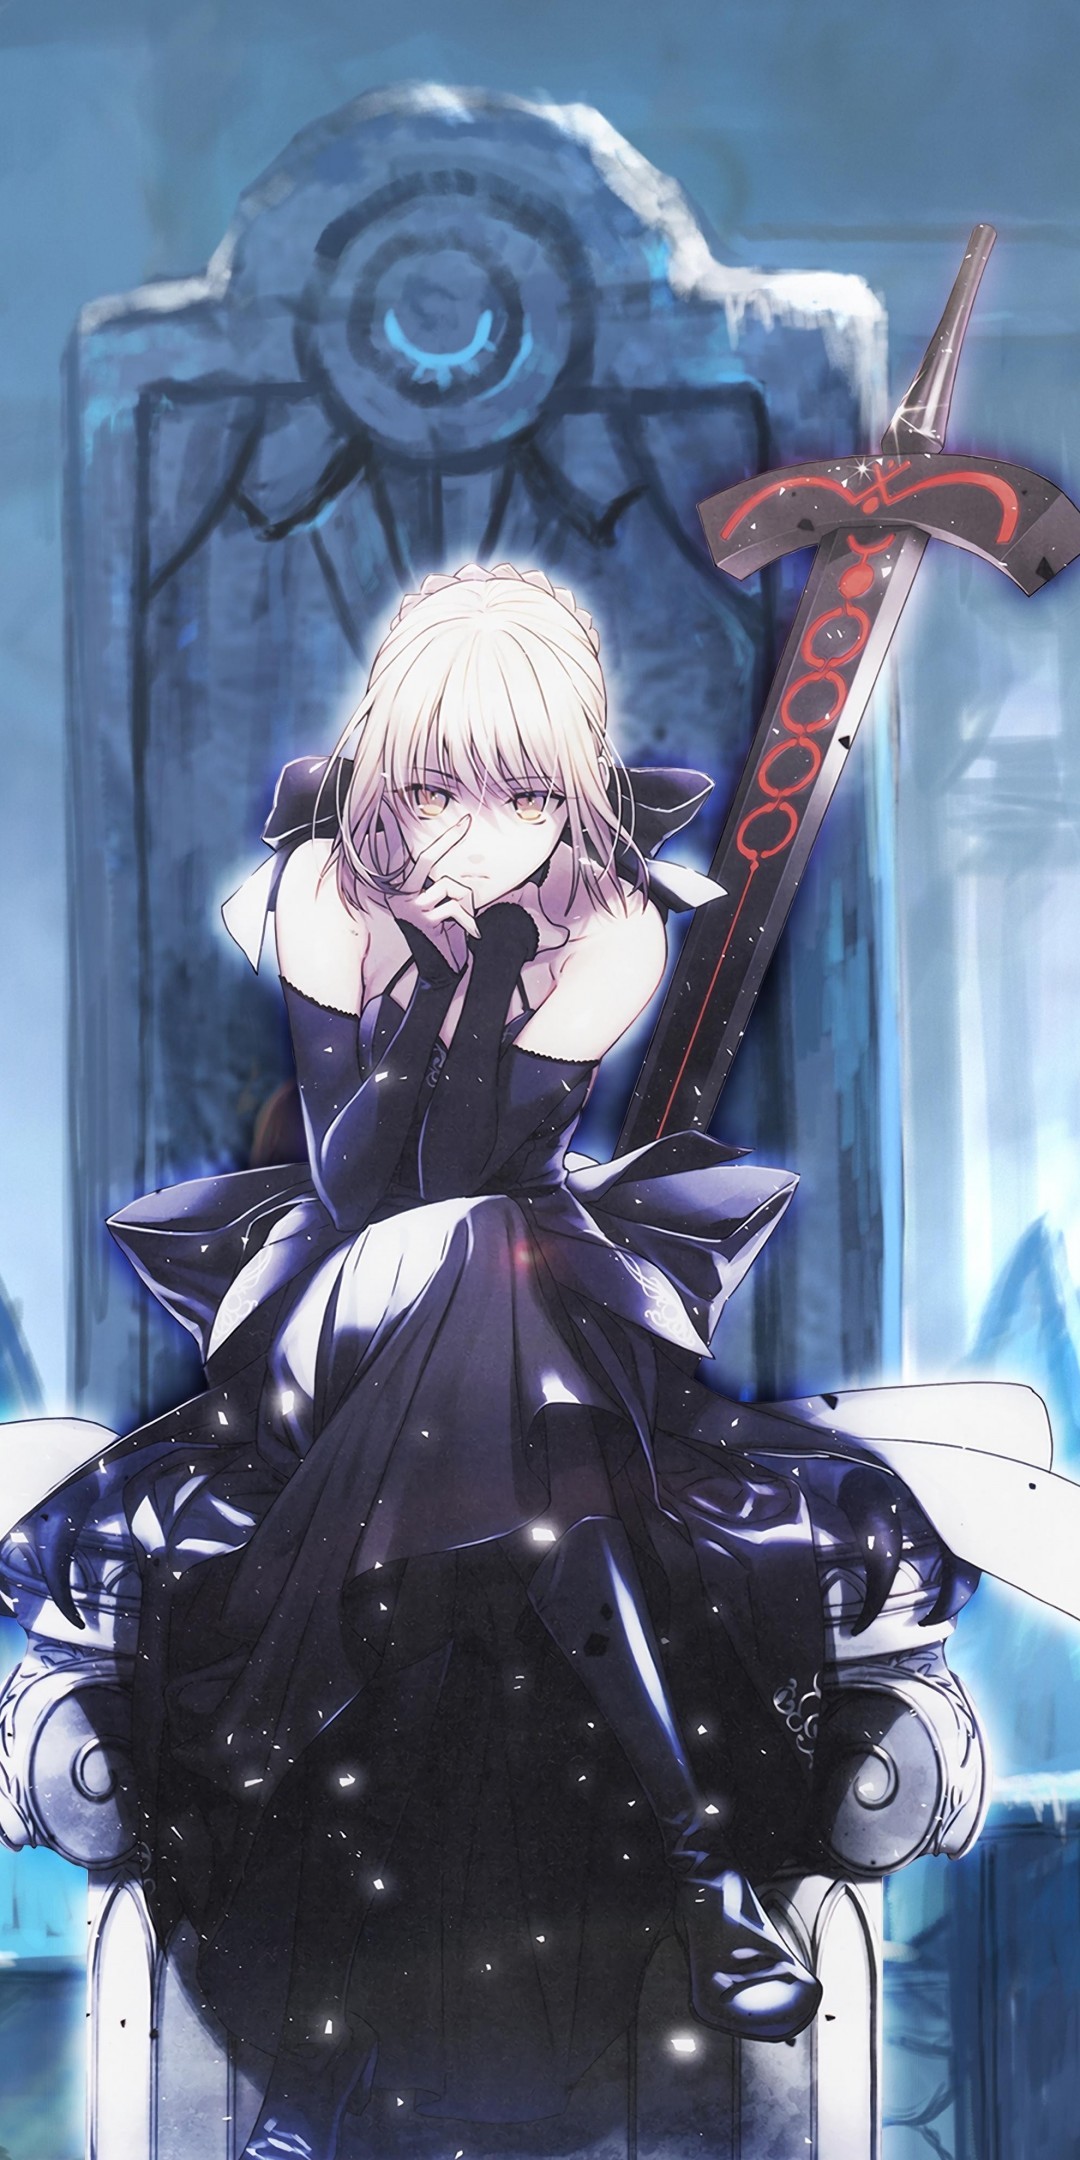 Saber, Fate Stay Night, Sword, Black Dress, Majestic, - Fate Live Wallpaper  Android - 1080x2160 Wallpaper 